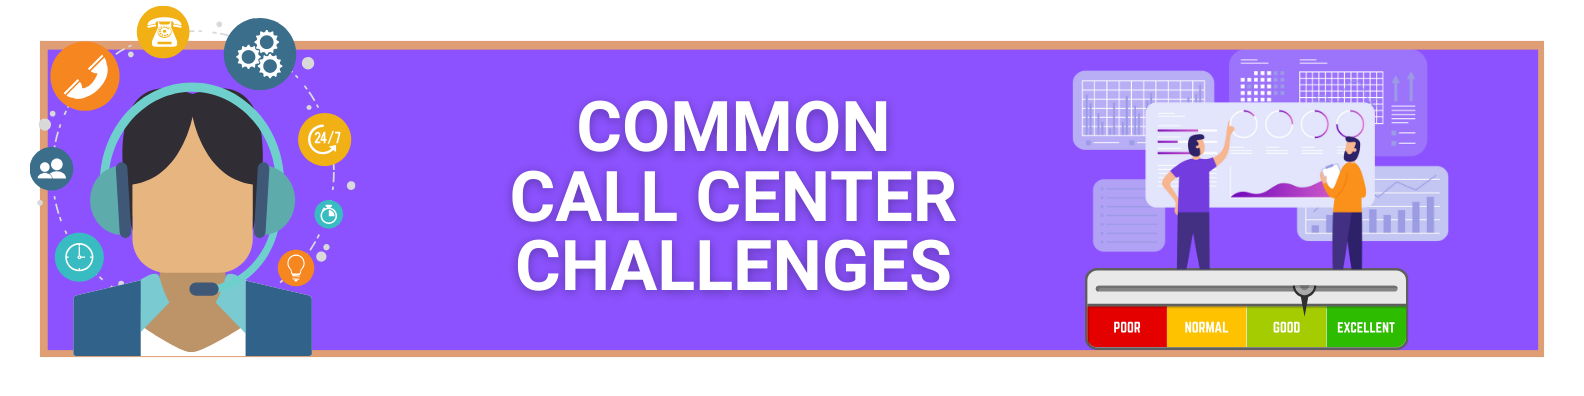 diagram of common call center challenges